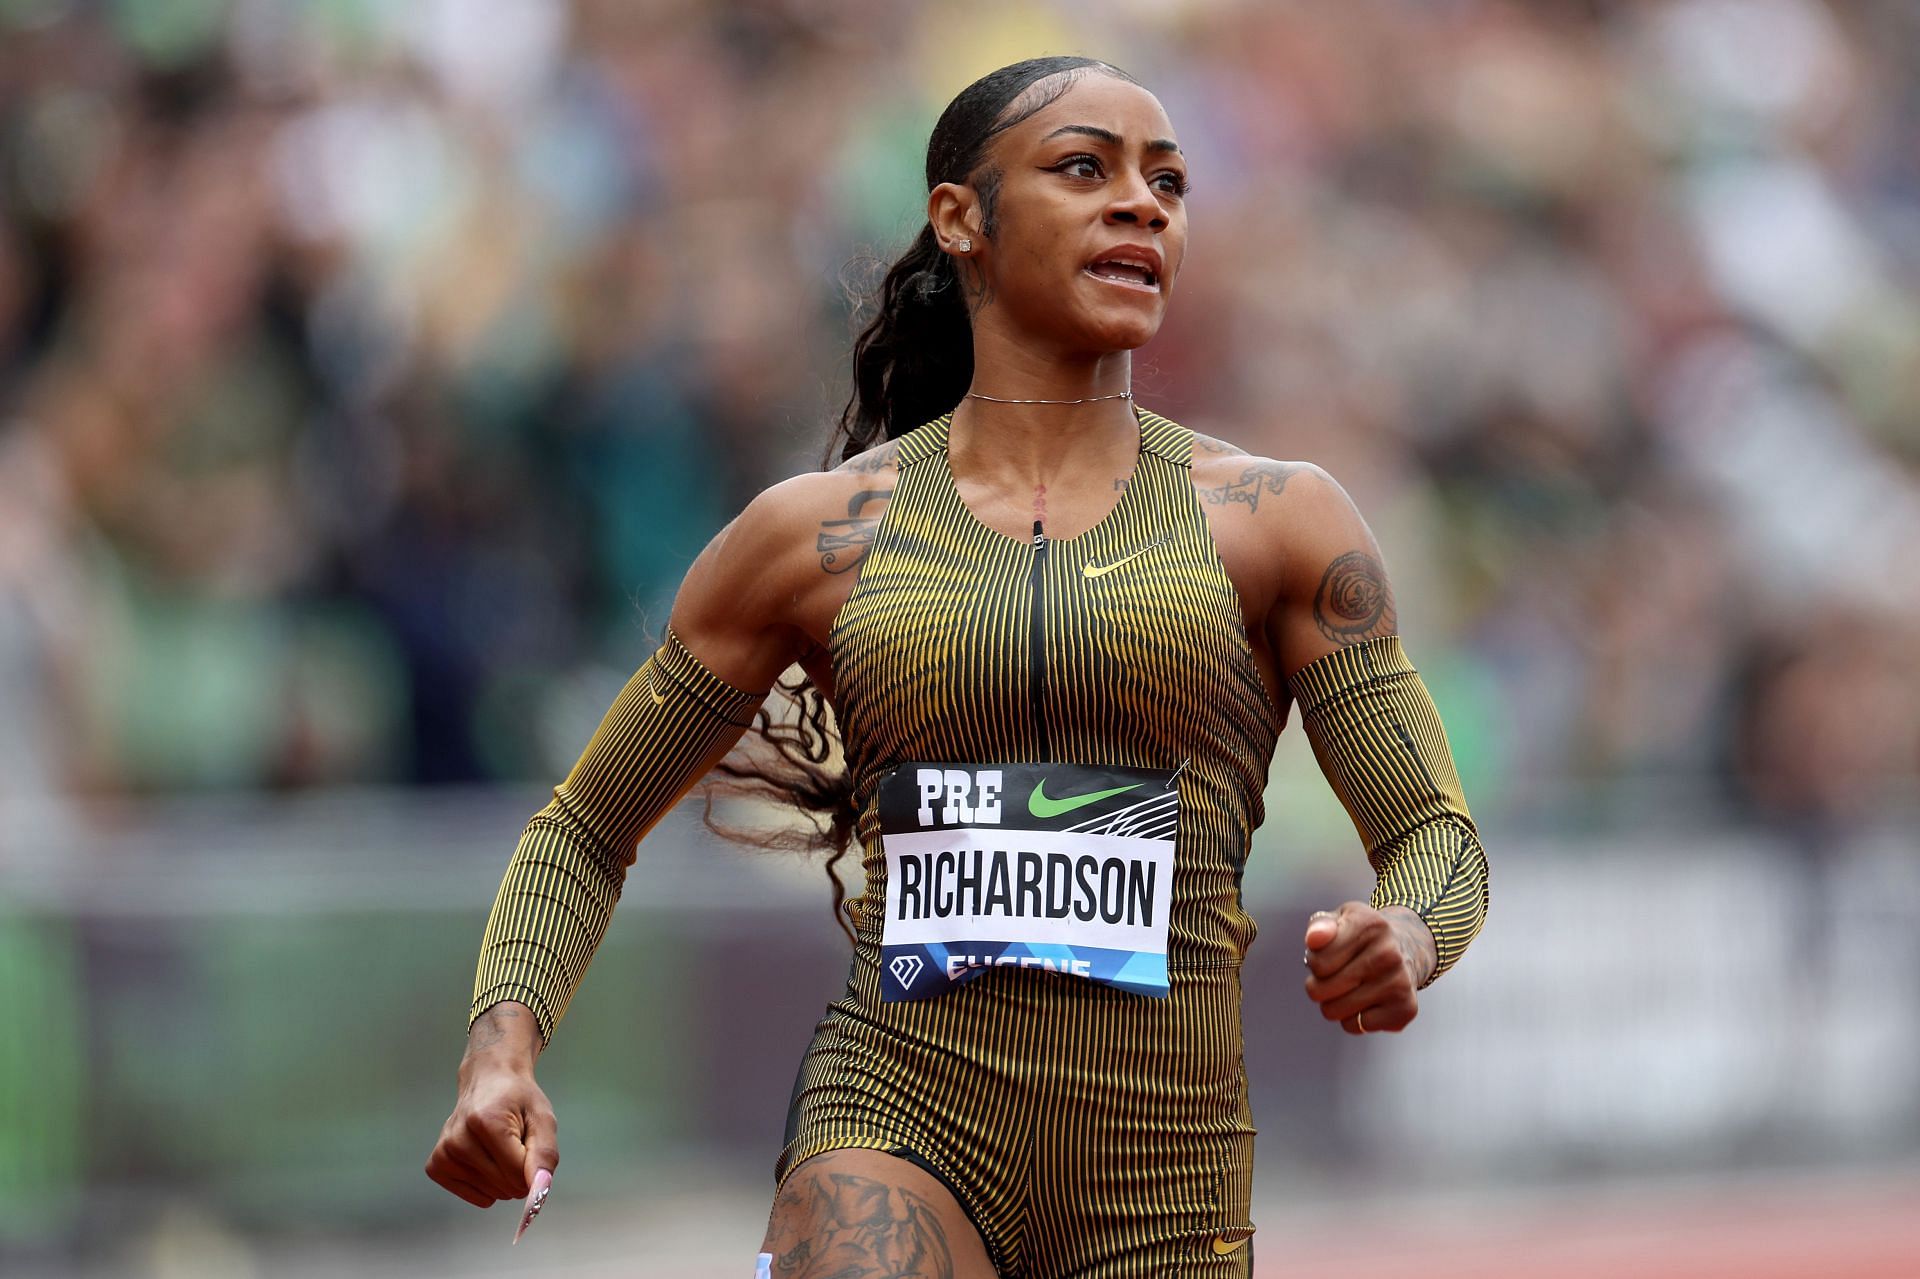 Sha&#039;Carri Richardson of Team USA wins the women&#039;s 100m during the Prefontaine Classic at Hayward Field in Eugene, Oregon.